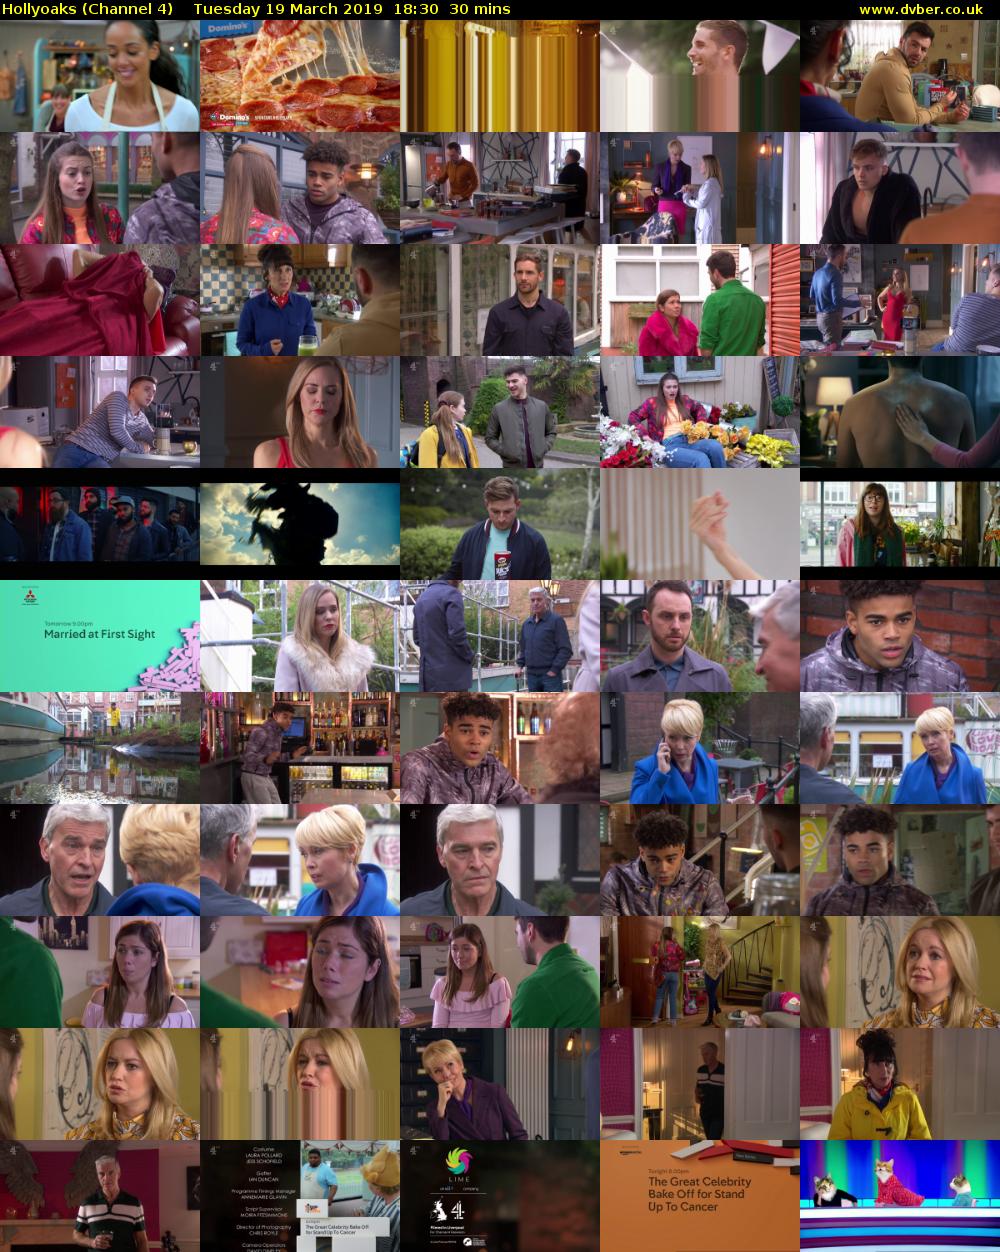 Hollyoaks (Channel 4) Tuesday 19 March 2019 18:30 - 19:00